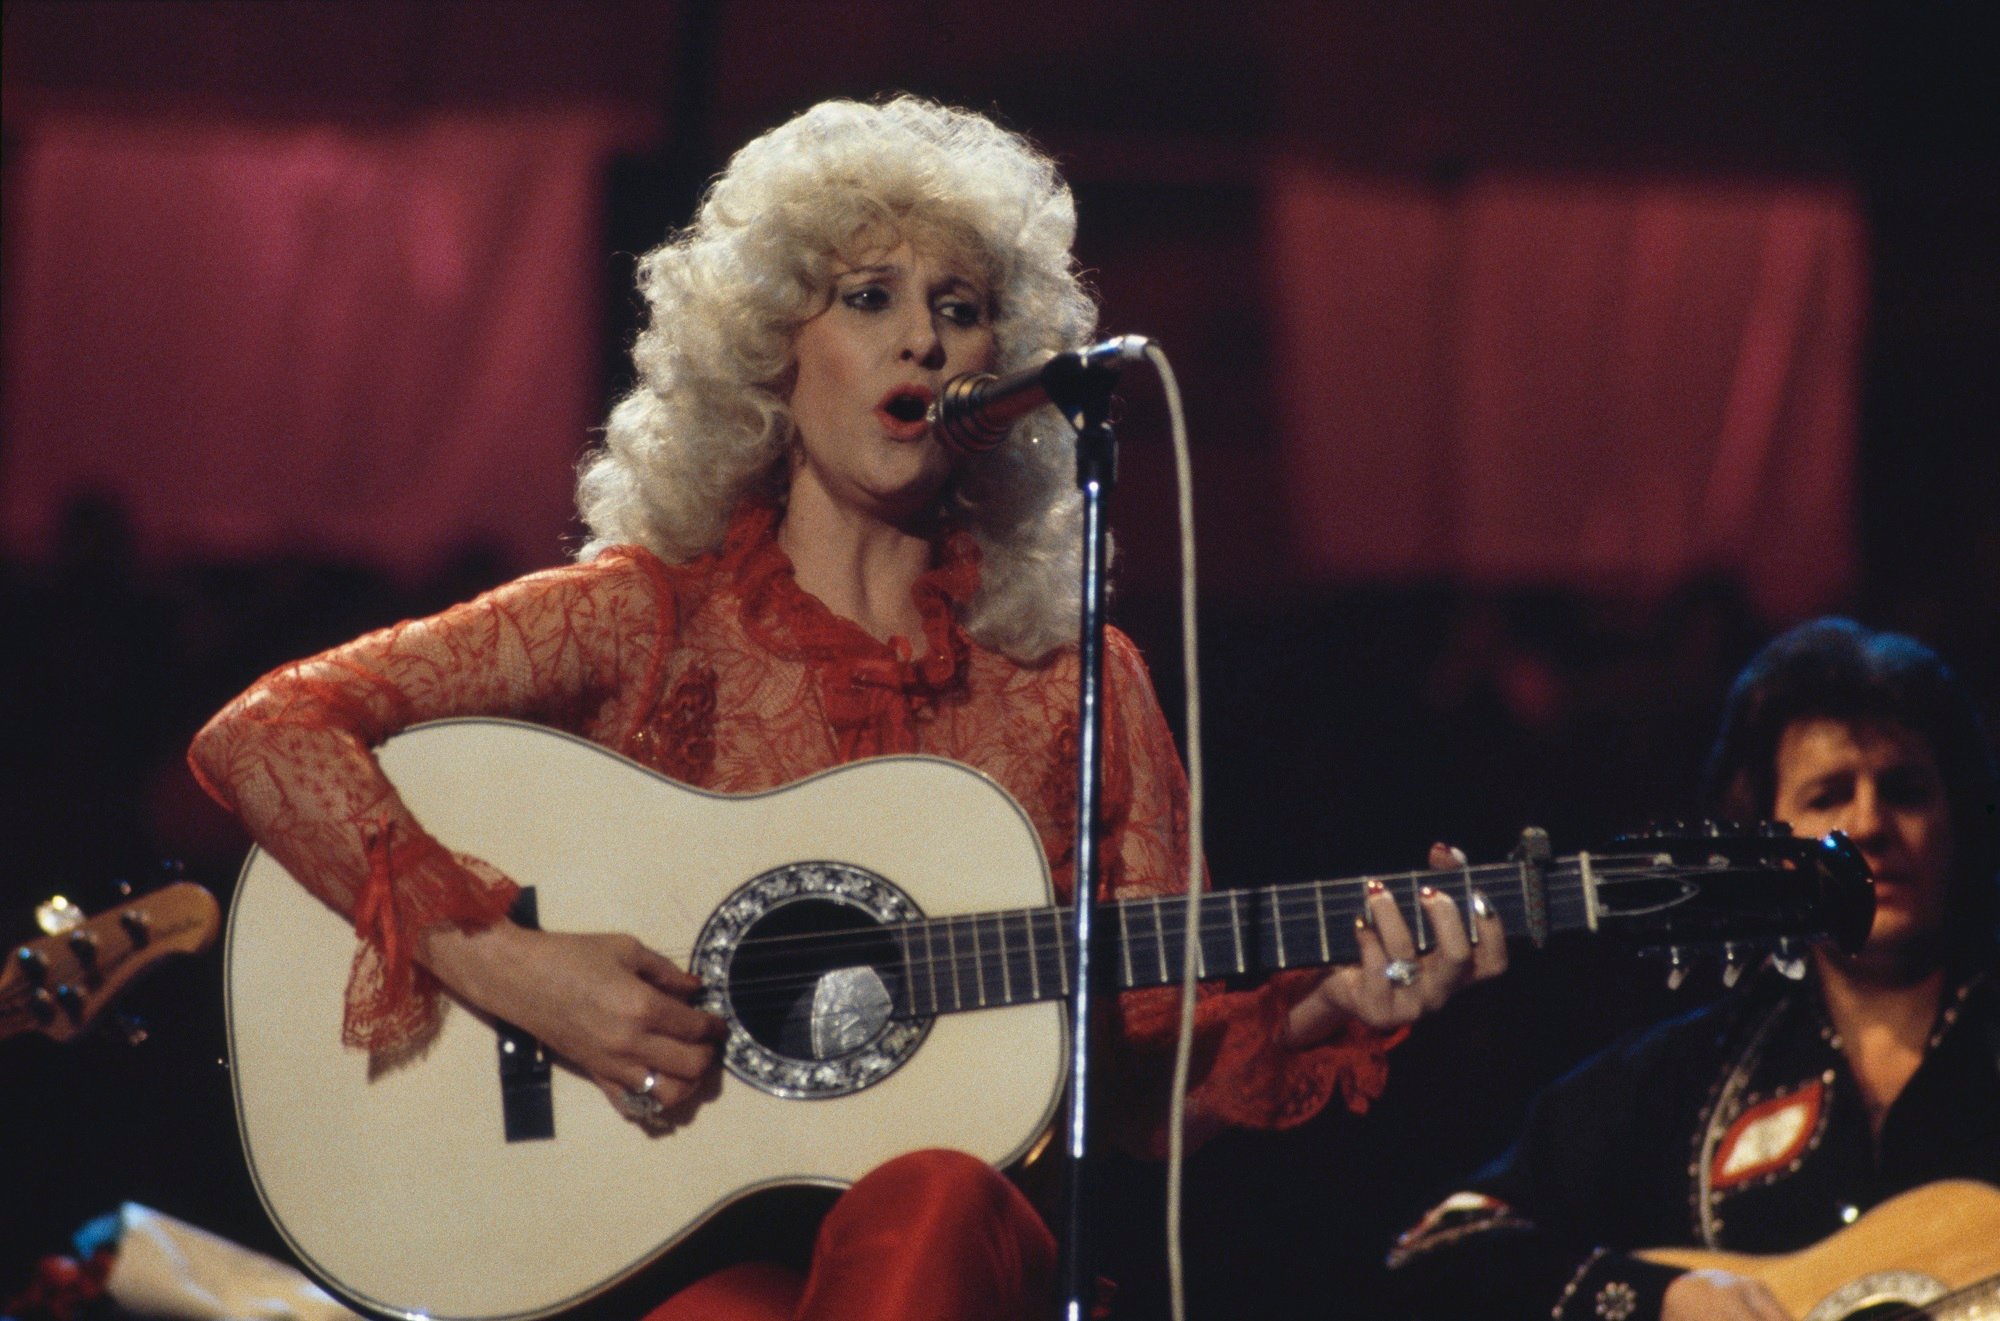 Tammy Wynette sings into a microphone while playing guitar onstage